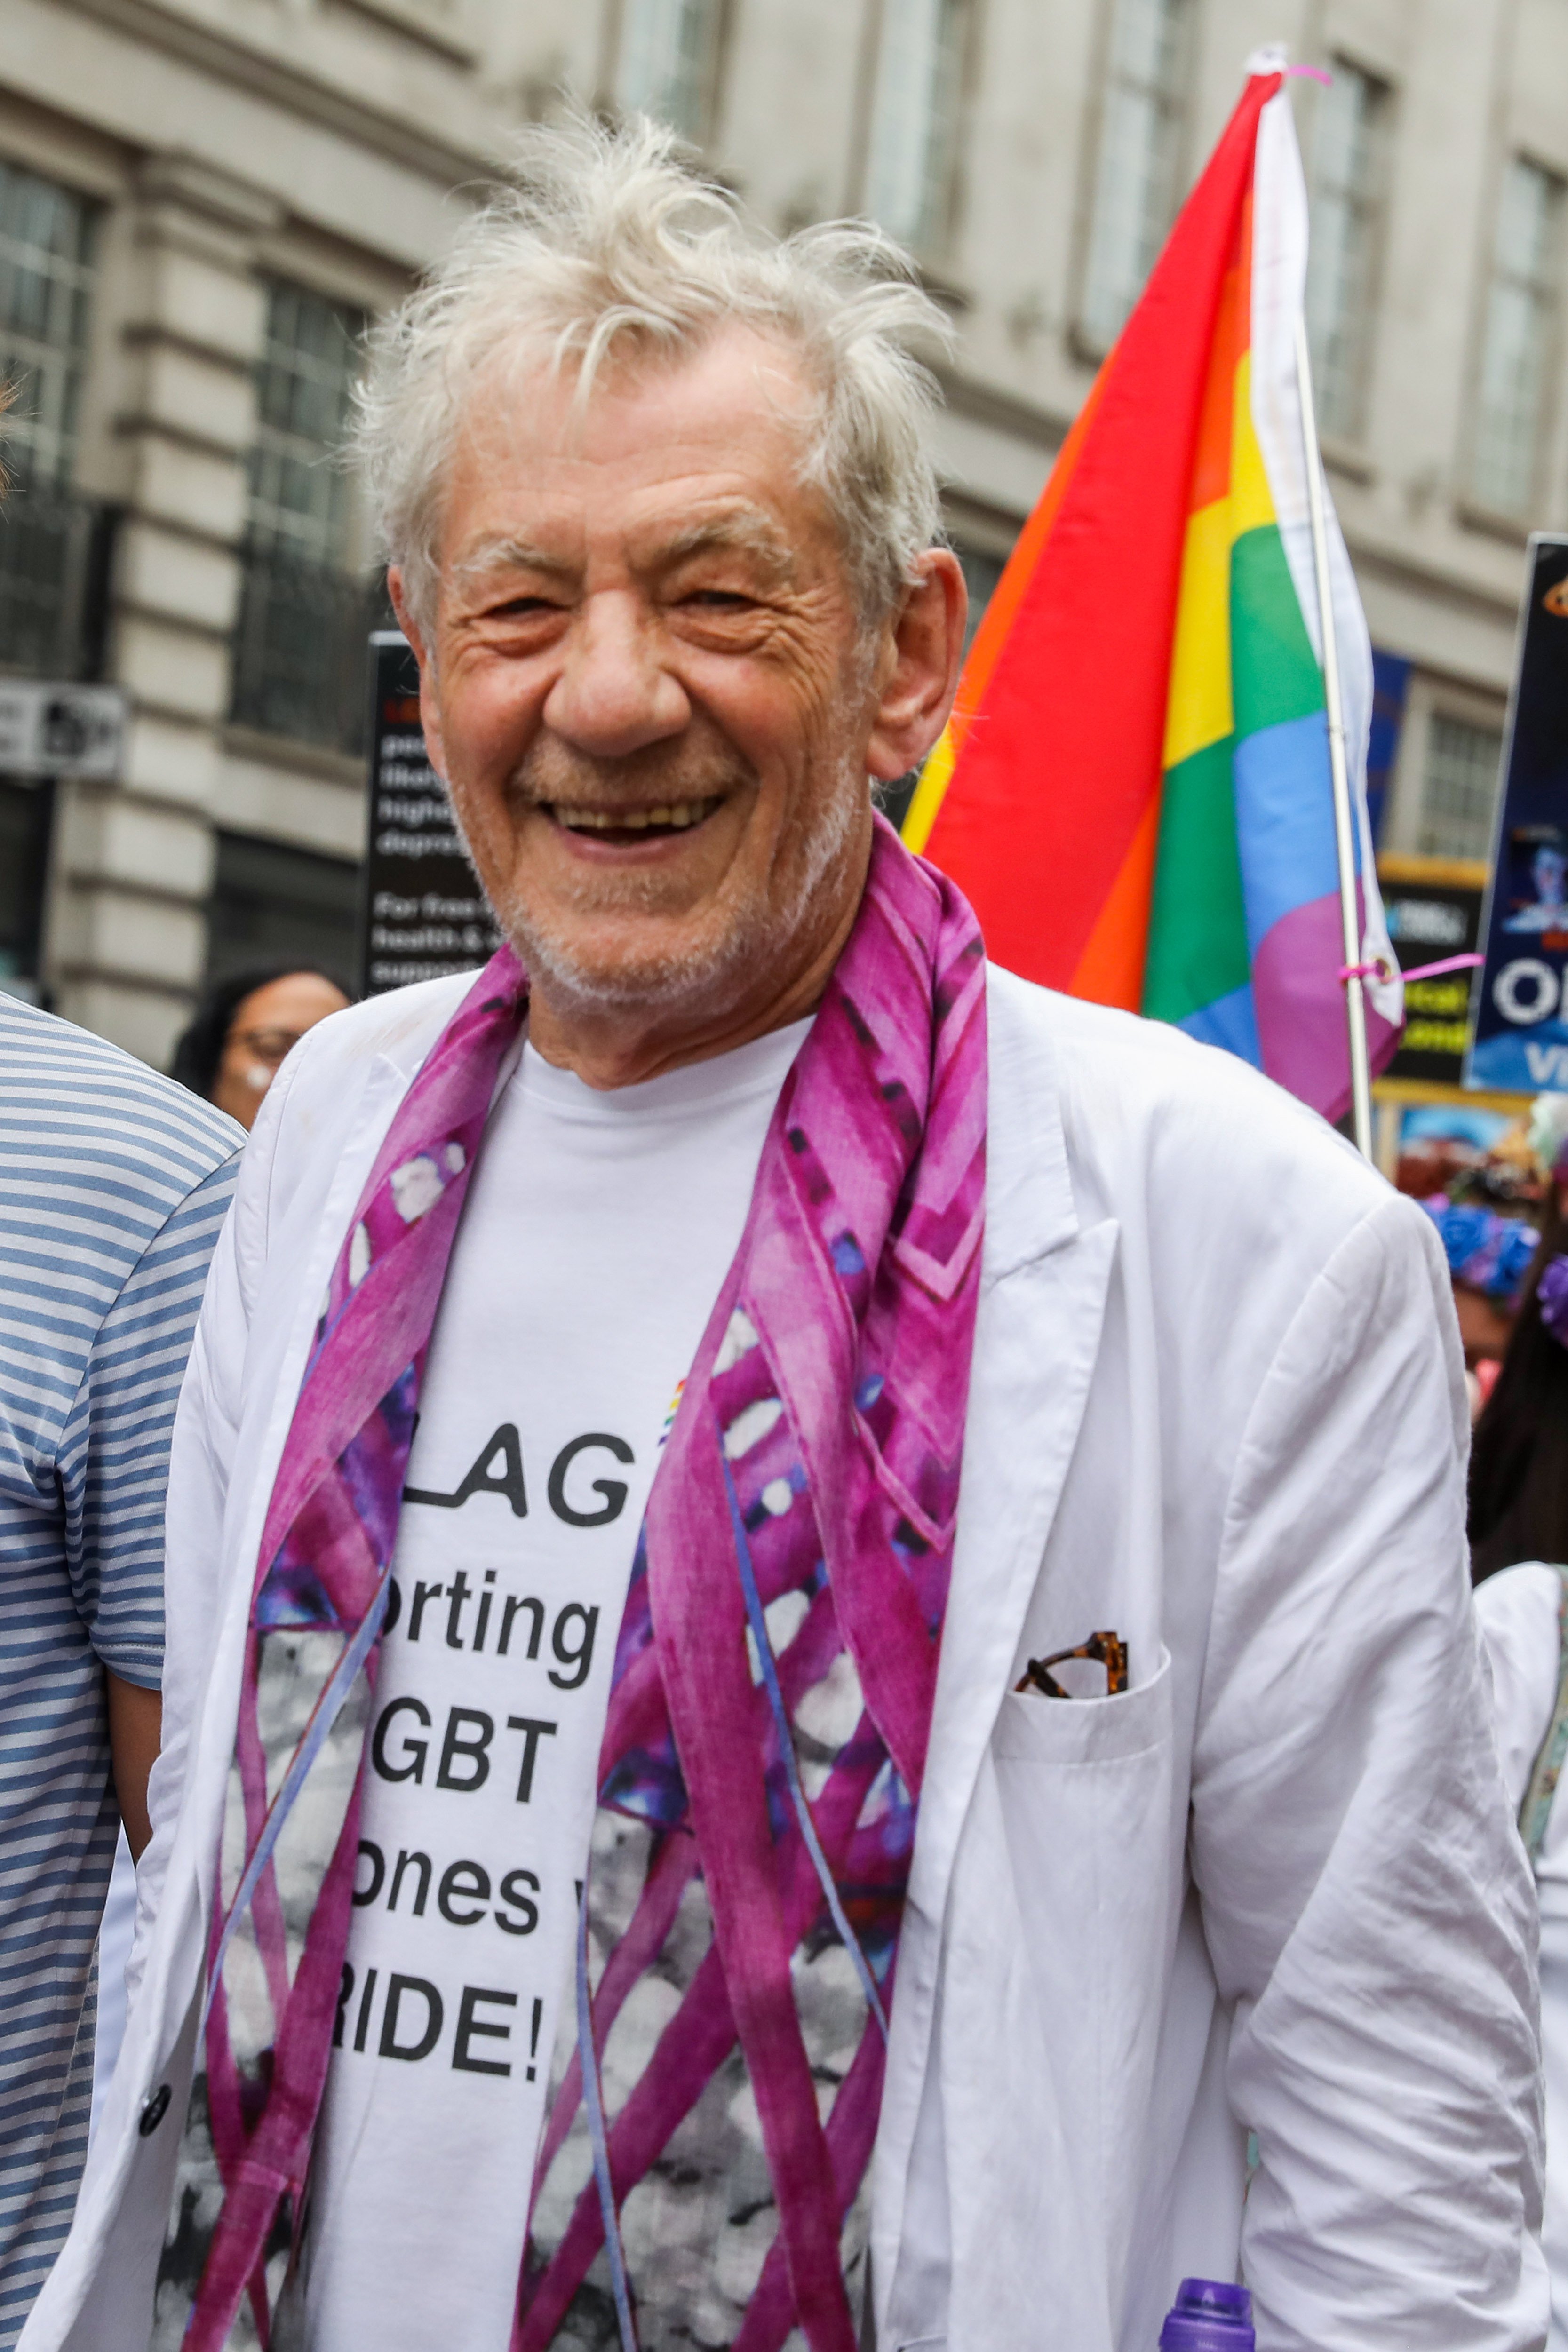 Ian McKellen walks through Piccadilly Circus during Pride in London, England on July 6, 2019 | Photo: Getty Images